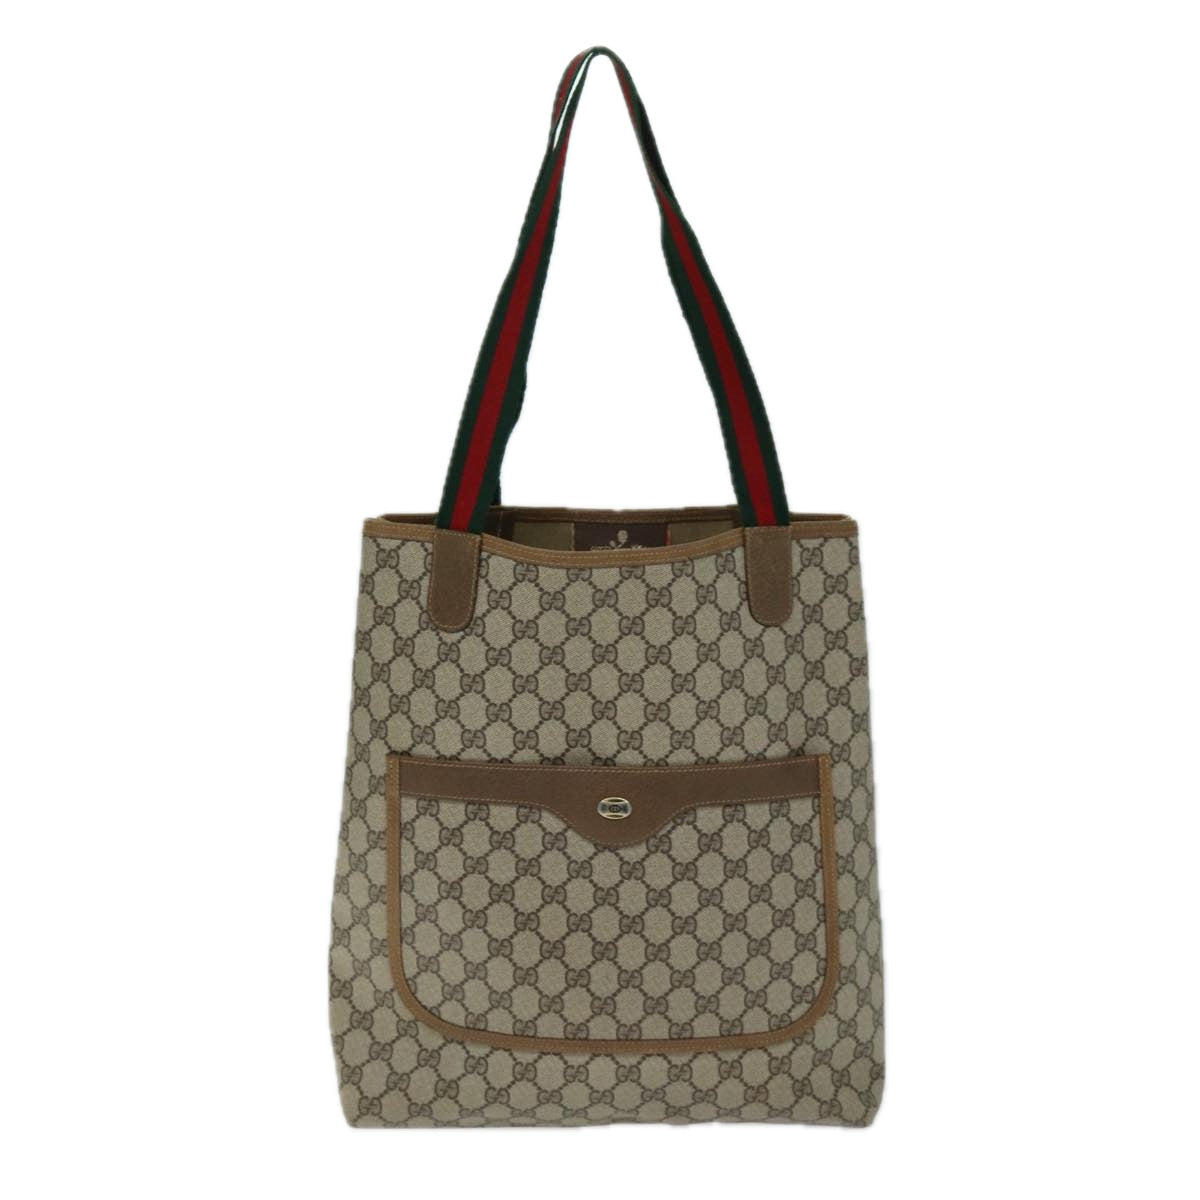 GUCCI GG Supreme Web Sherry Line Tote Bag PVC Beige Red 40 02 003 Auth 73612